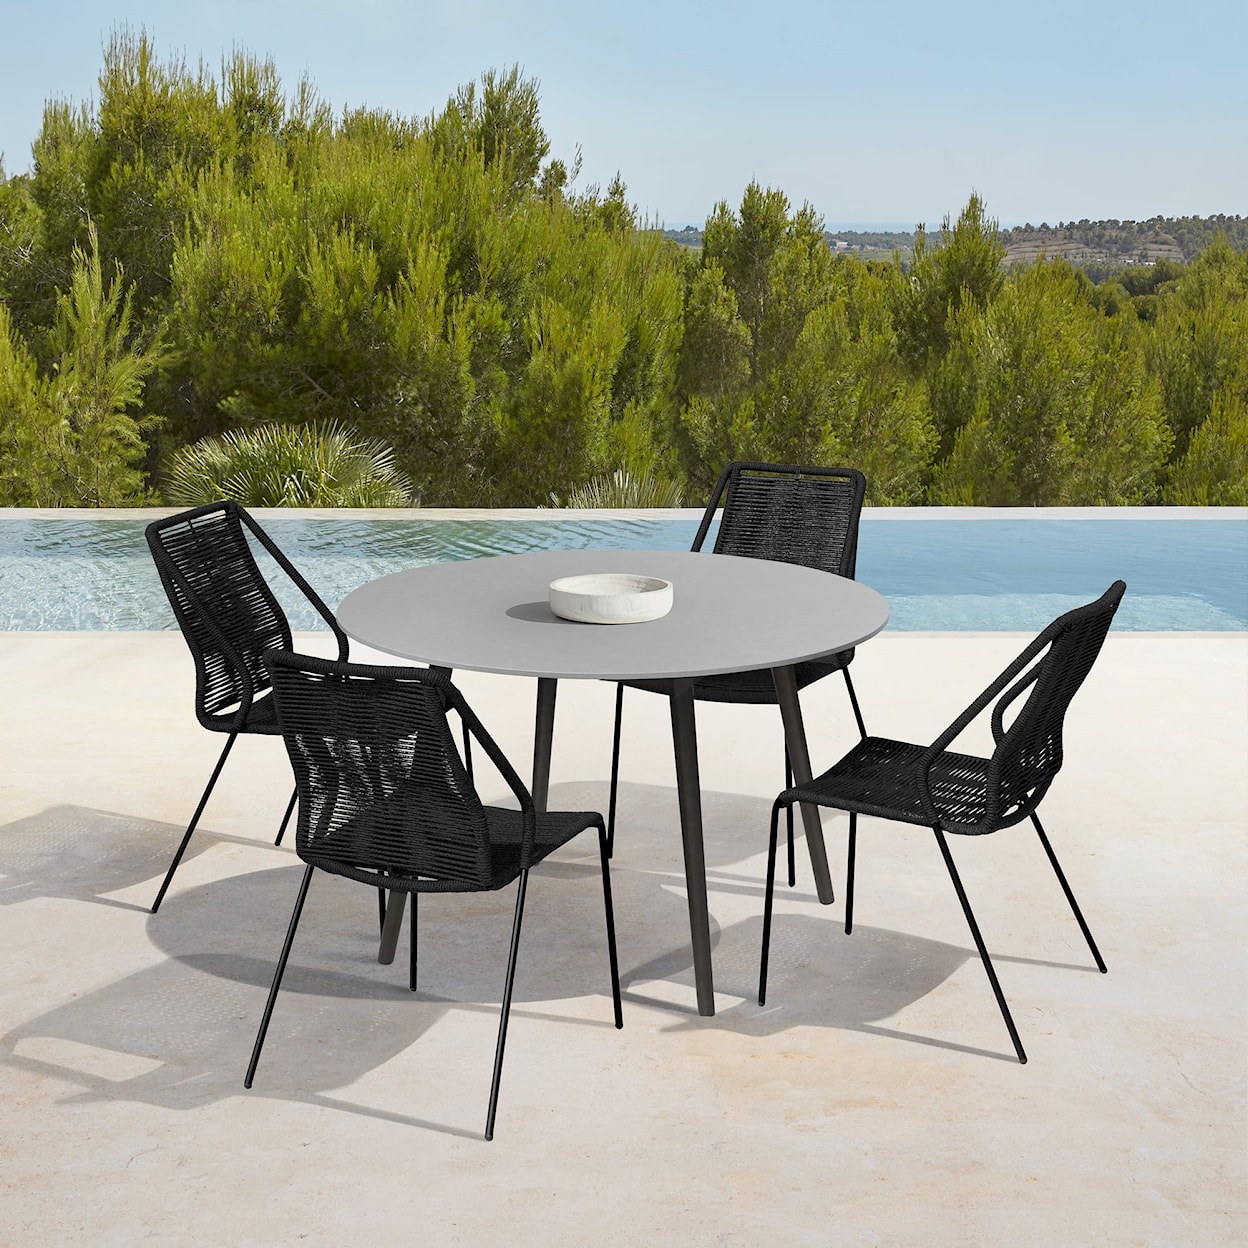 Armen Living Syndey / Clip 5-Piece Outdoor Dining Set